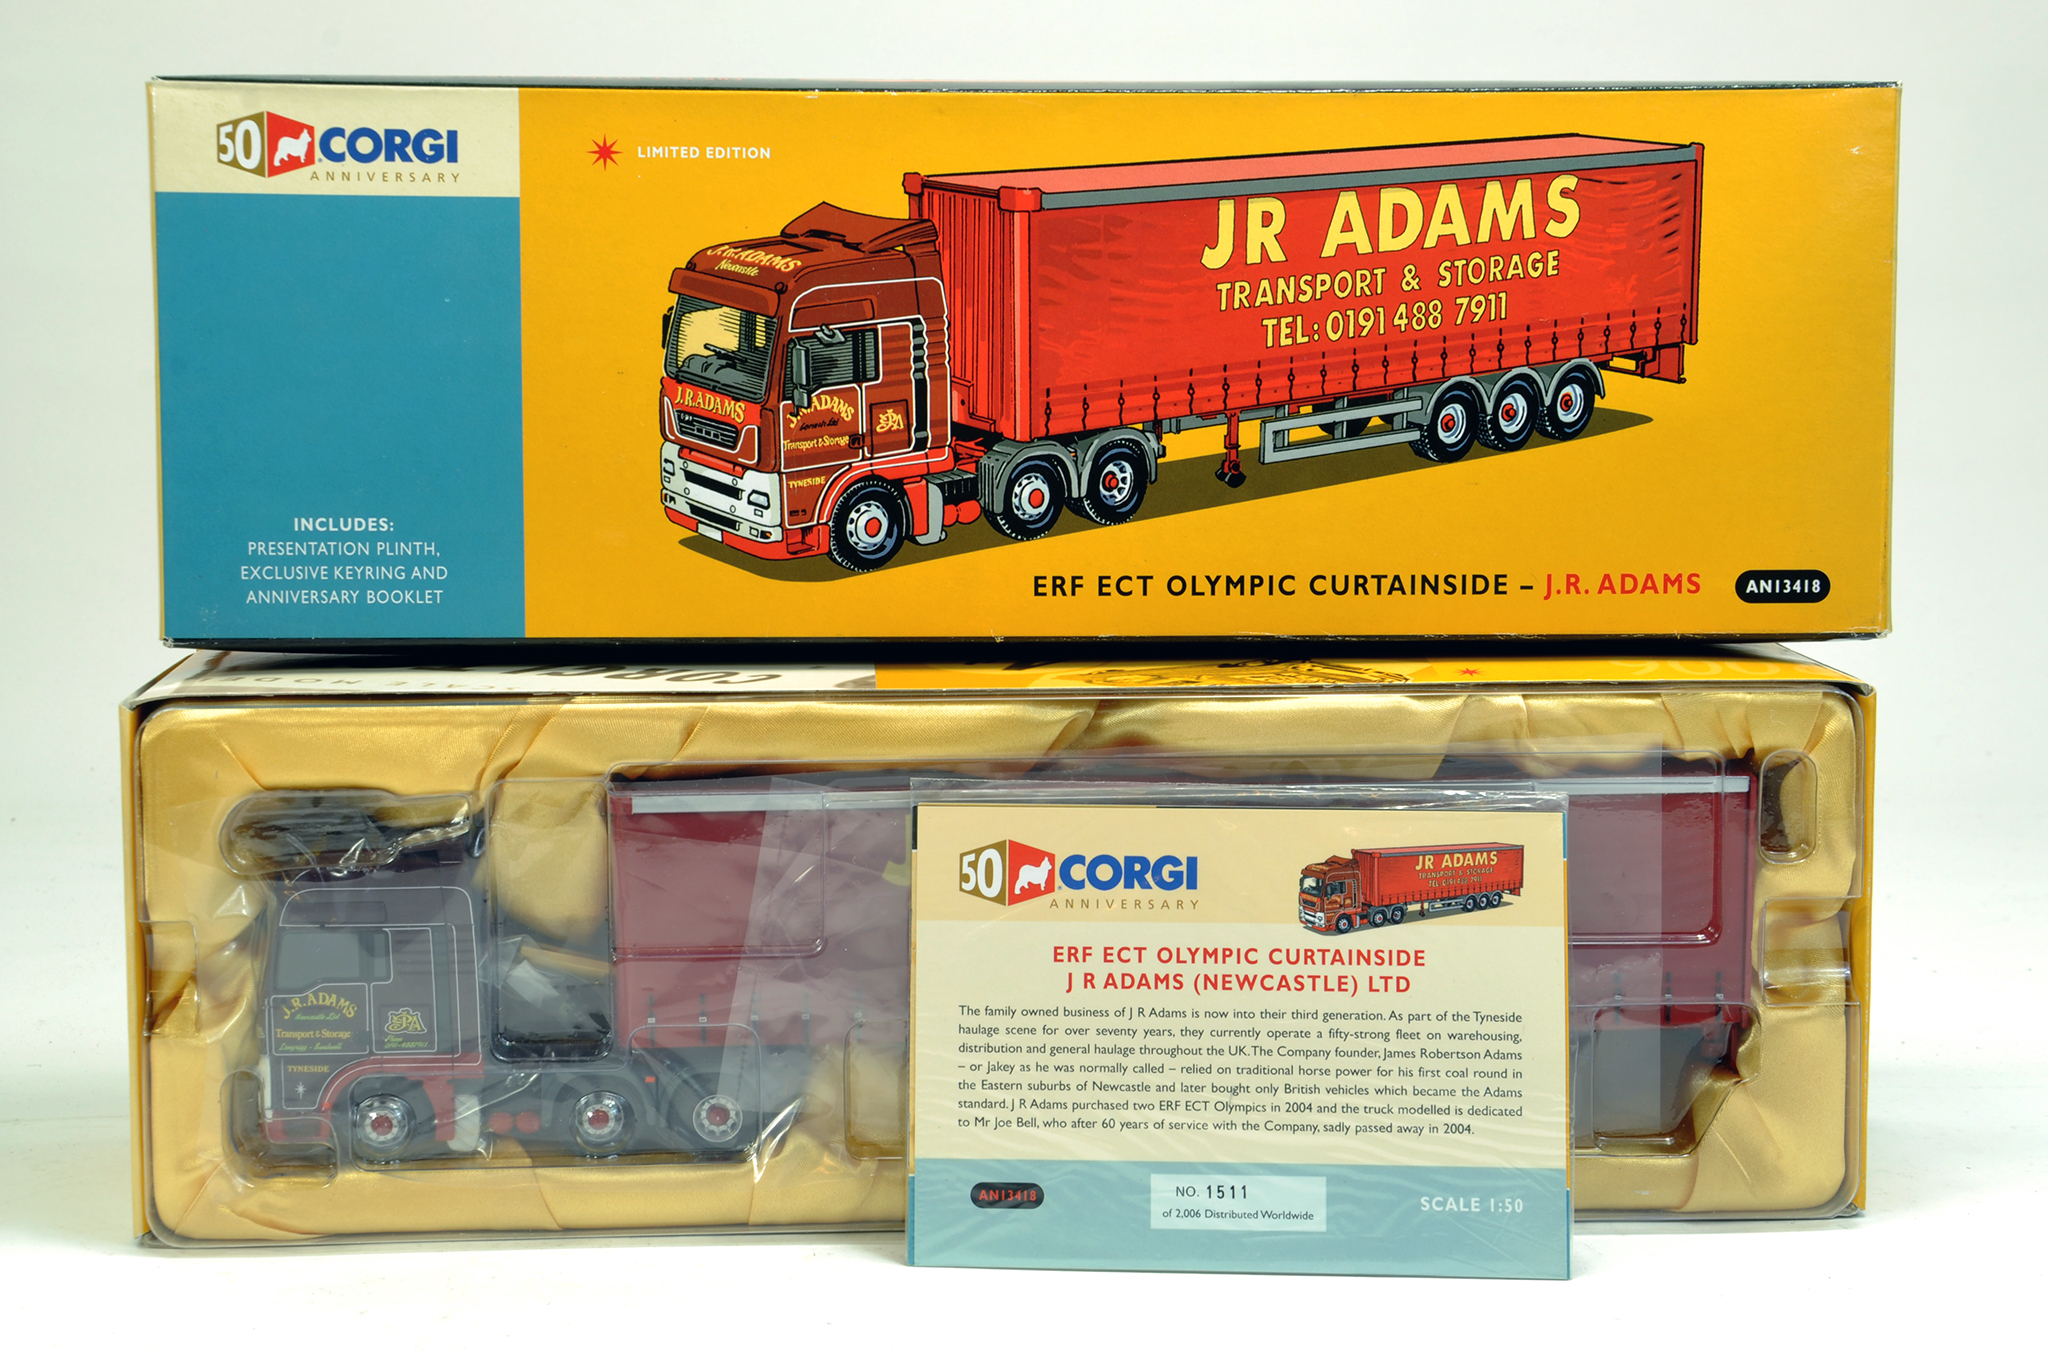 Corgi 1/50 diecast truck issue comprising No. AN13418 50th Anniversary ERF ECT Olympic Curtainside